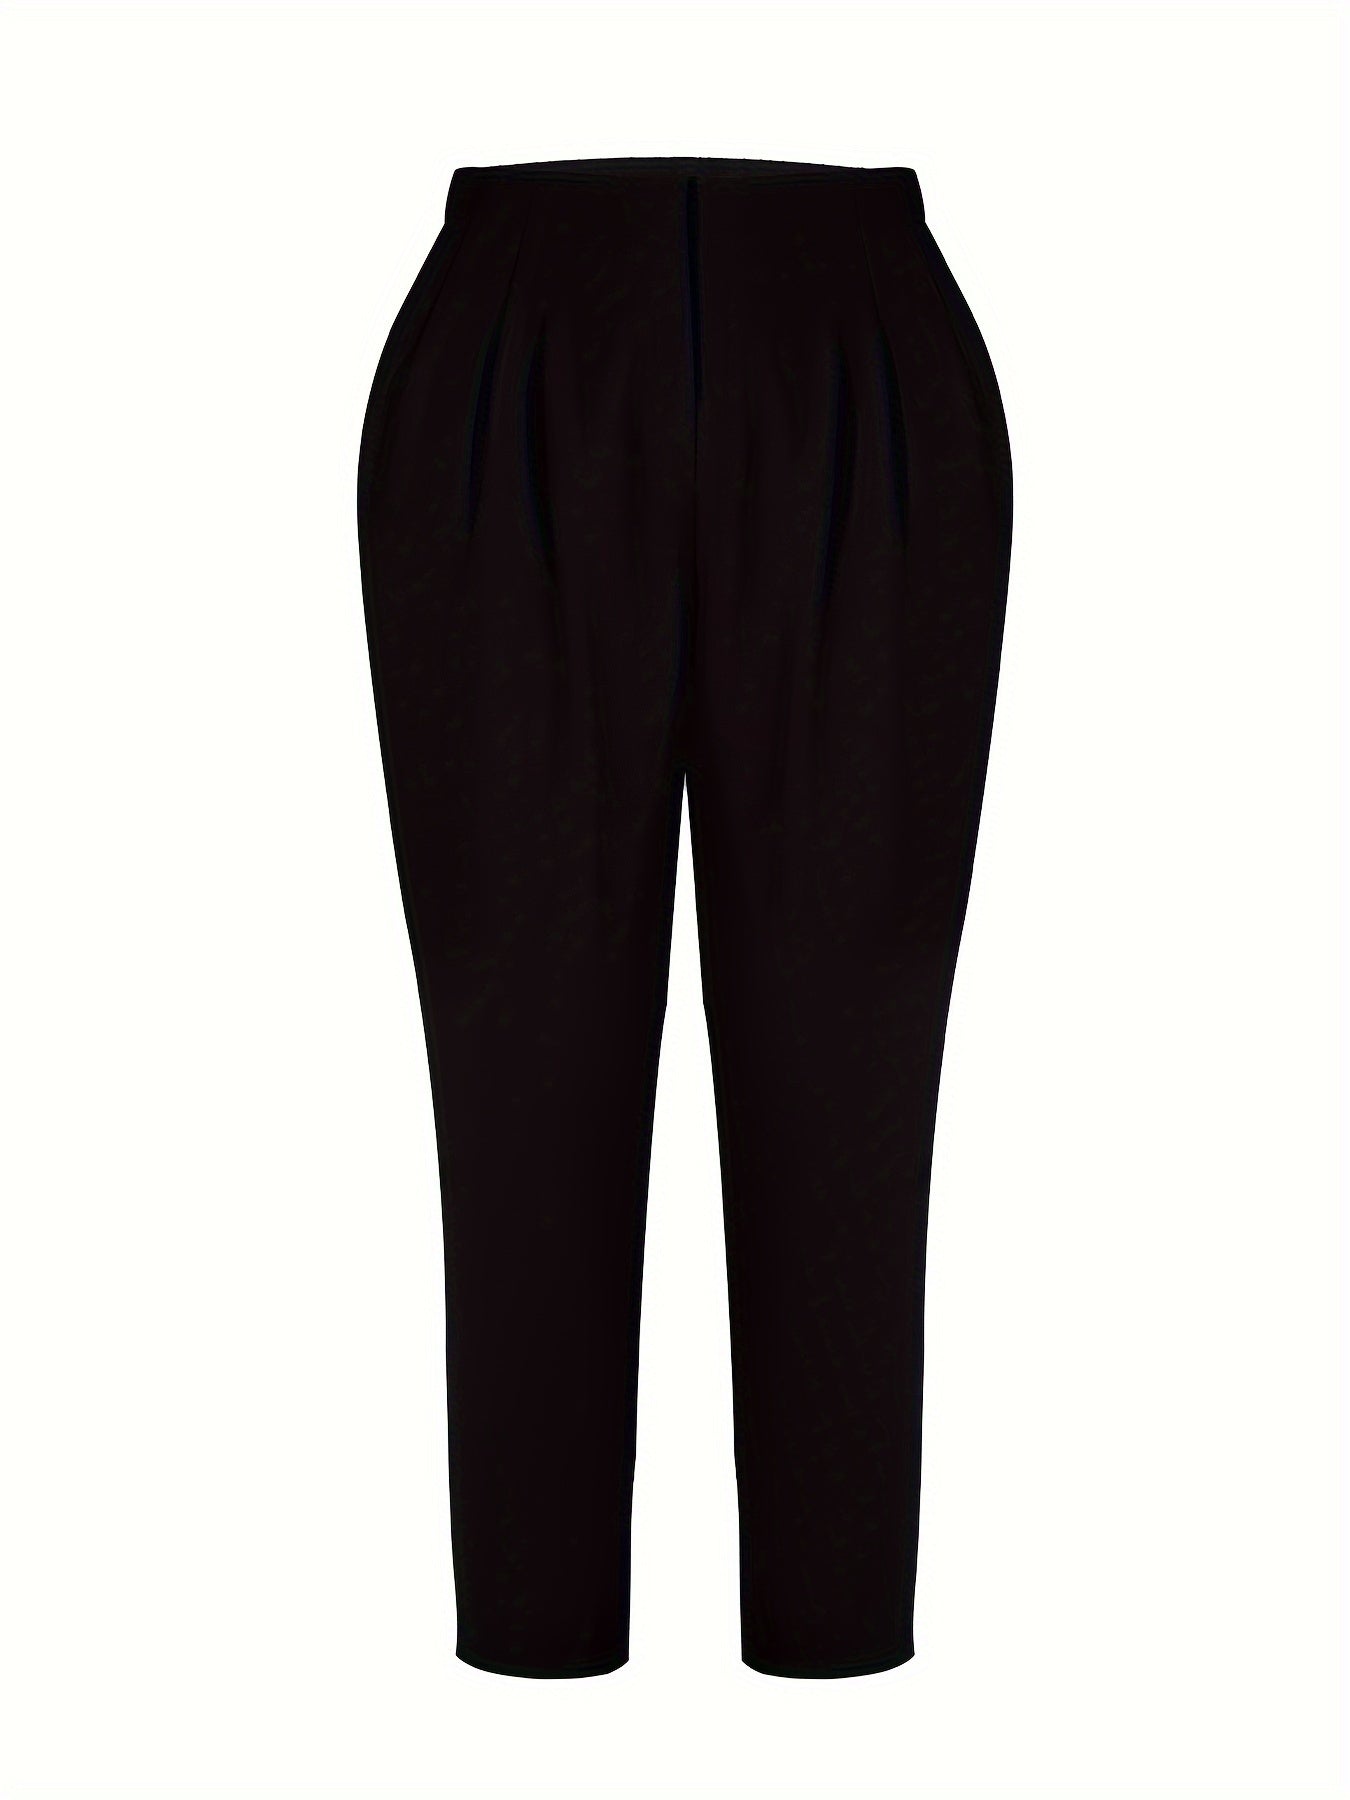 Plus Size Business Casual Pants, Women's Plus Solid Plicated Detail High Rise Tapered Leg Trousers